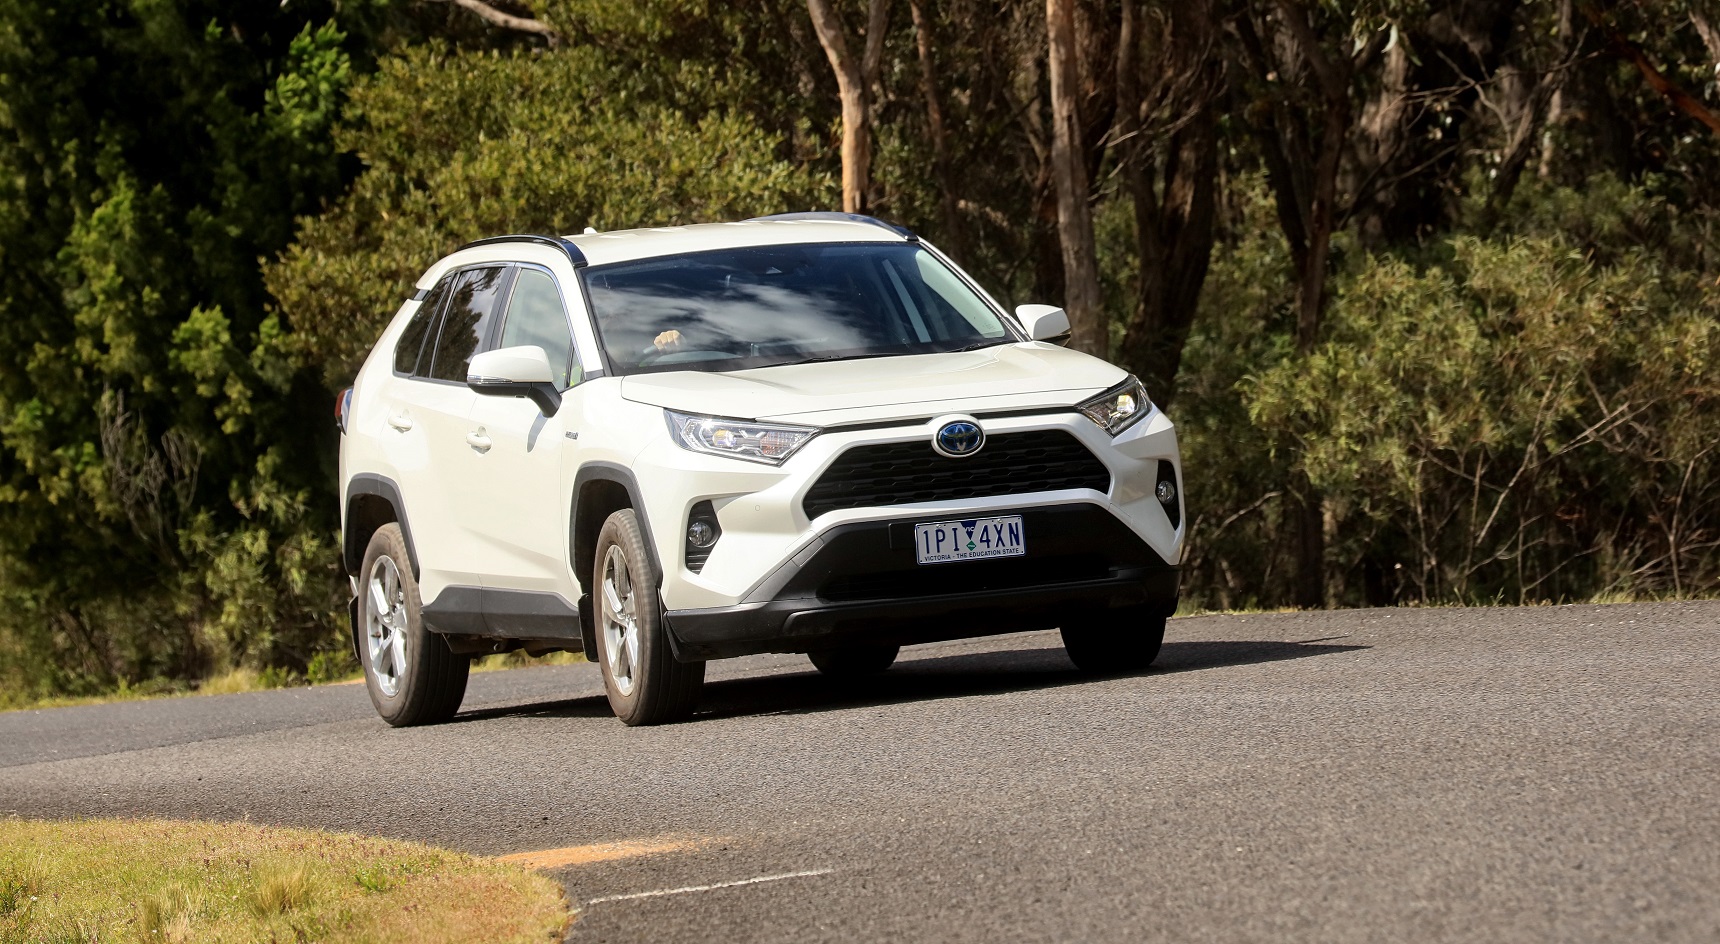 The RAV4 took a significant step up with the all-new 2019 model.